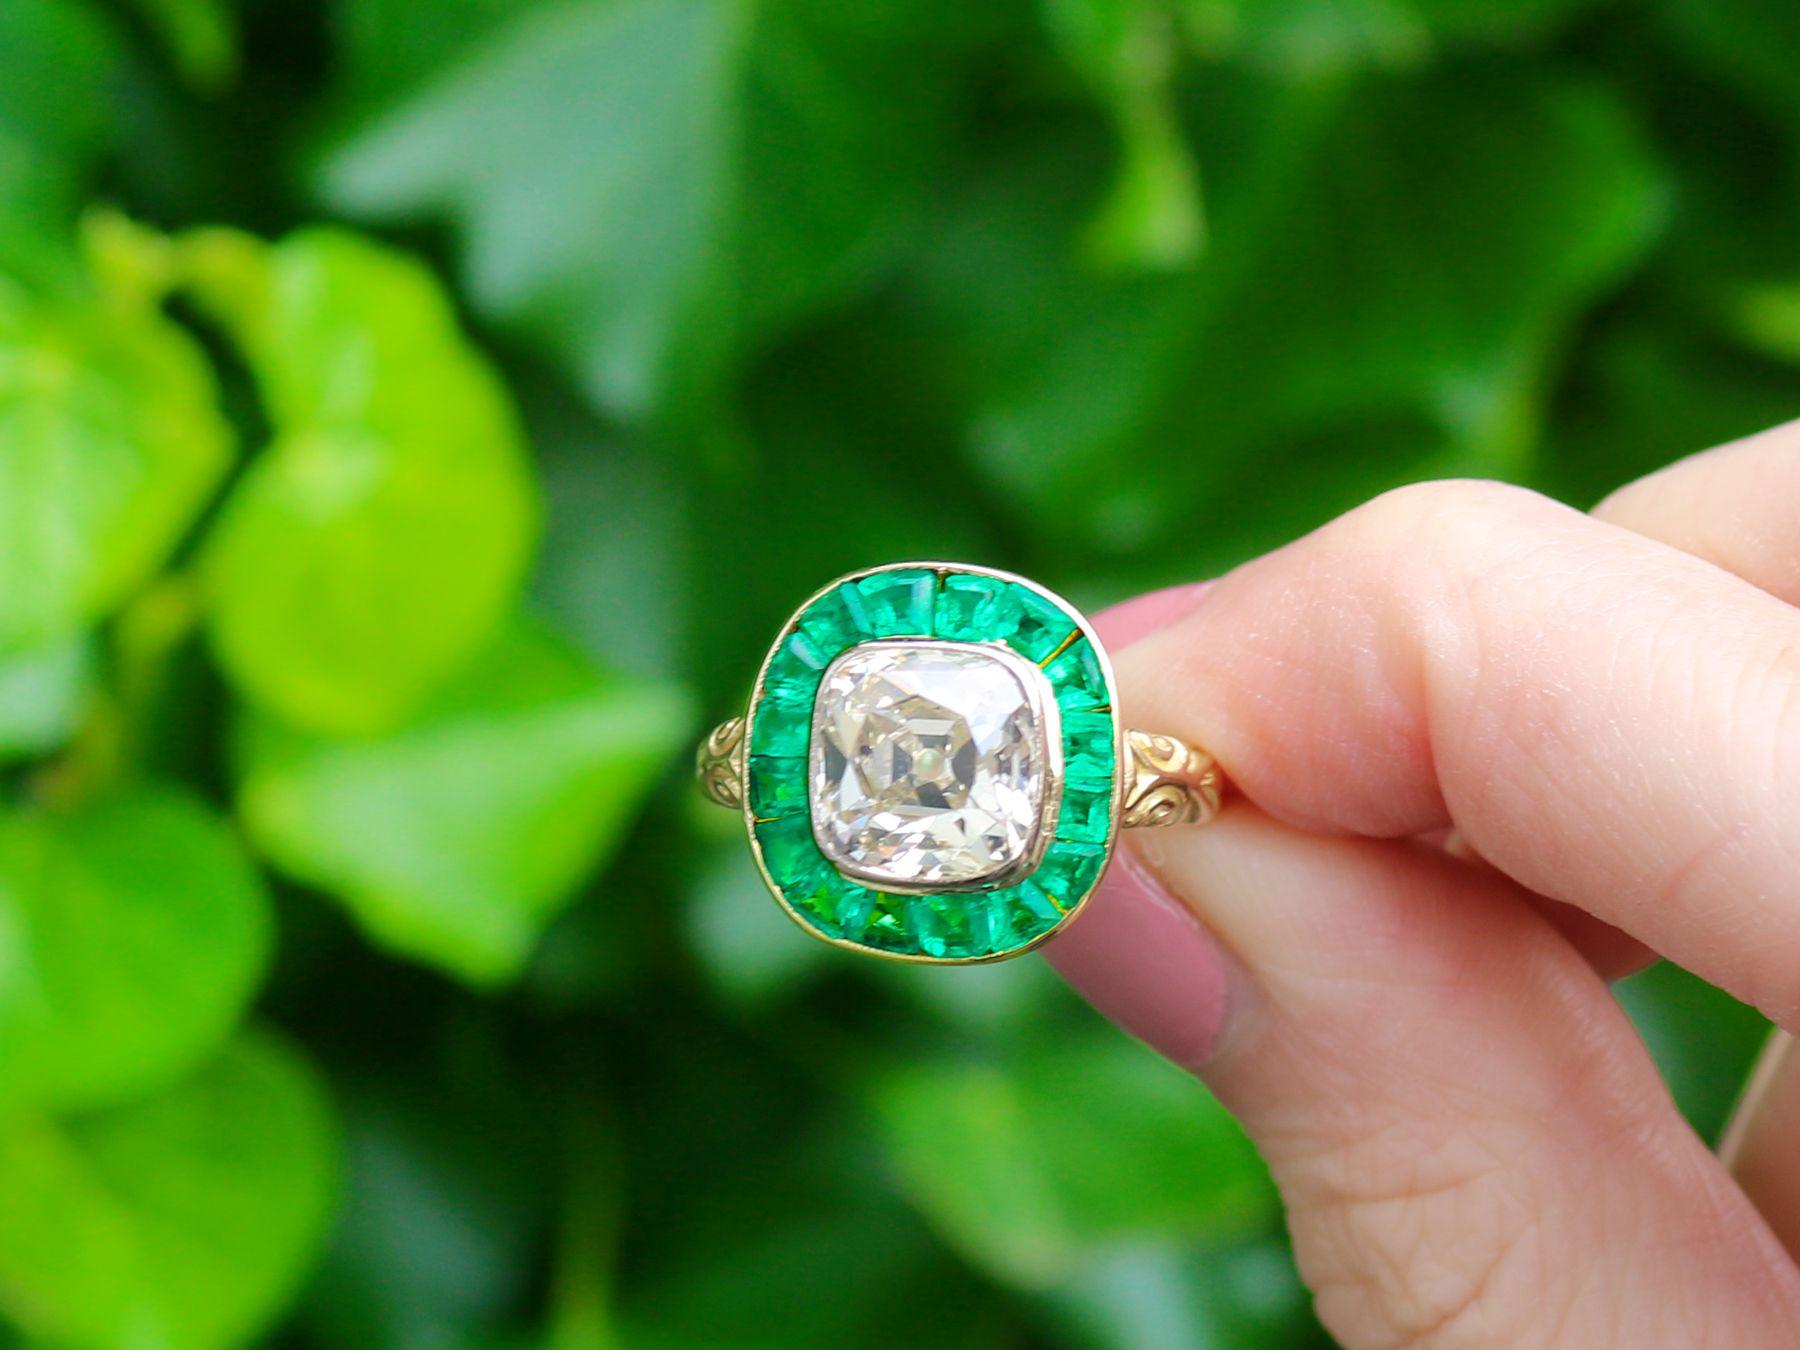 A stunning antique Victorian 3.25 carat emerald and 1.92 carat diamond, 18 karat yellow and white gold cocktail ring; part of our diverse antique jewelry and estate jewelry collections.

This stunning, fine and impressive Victorian emerald ring has